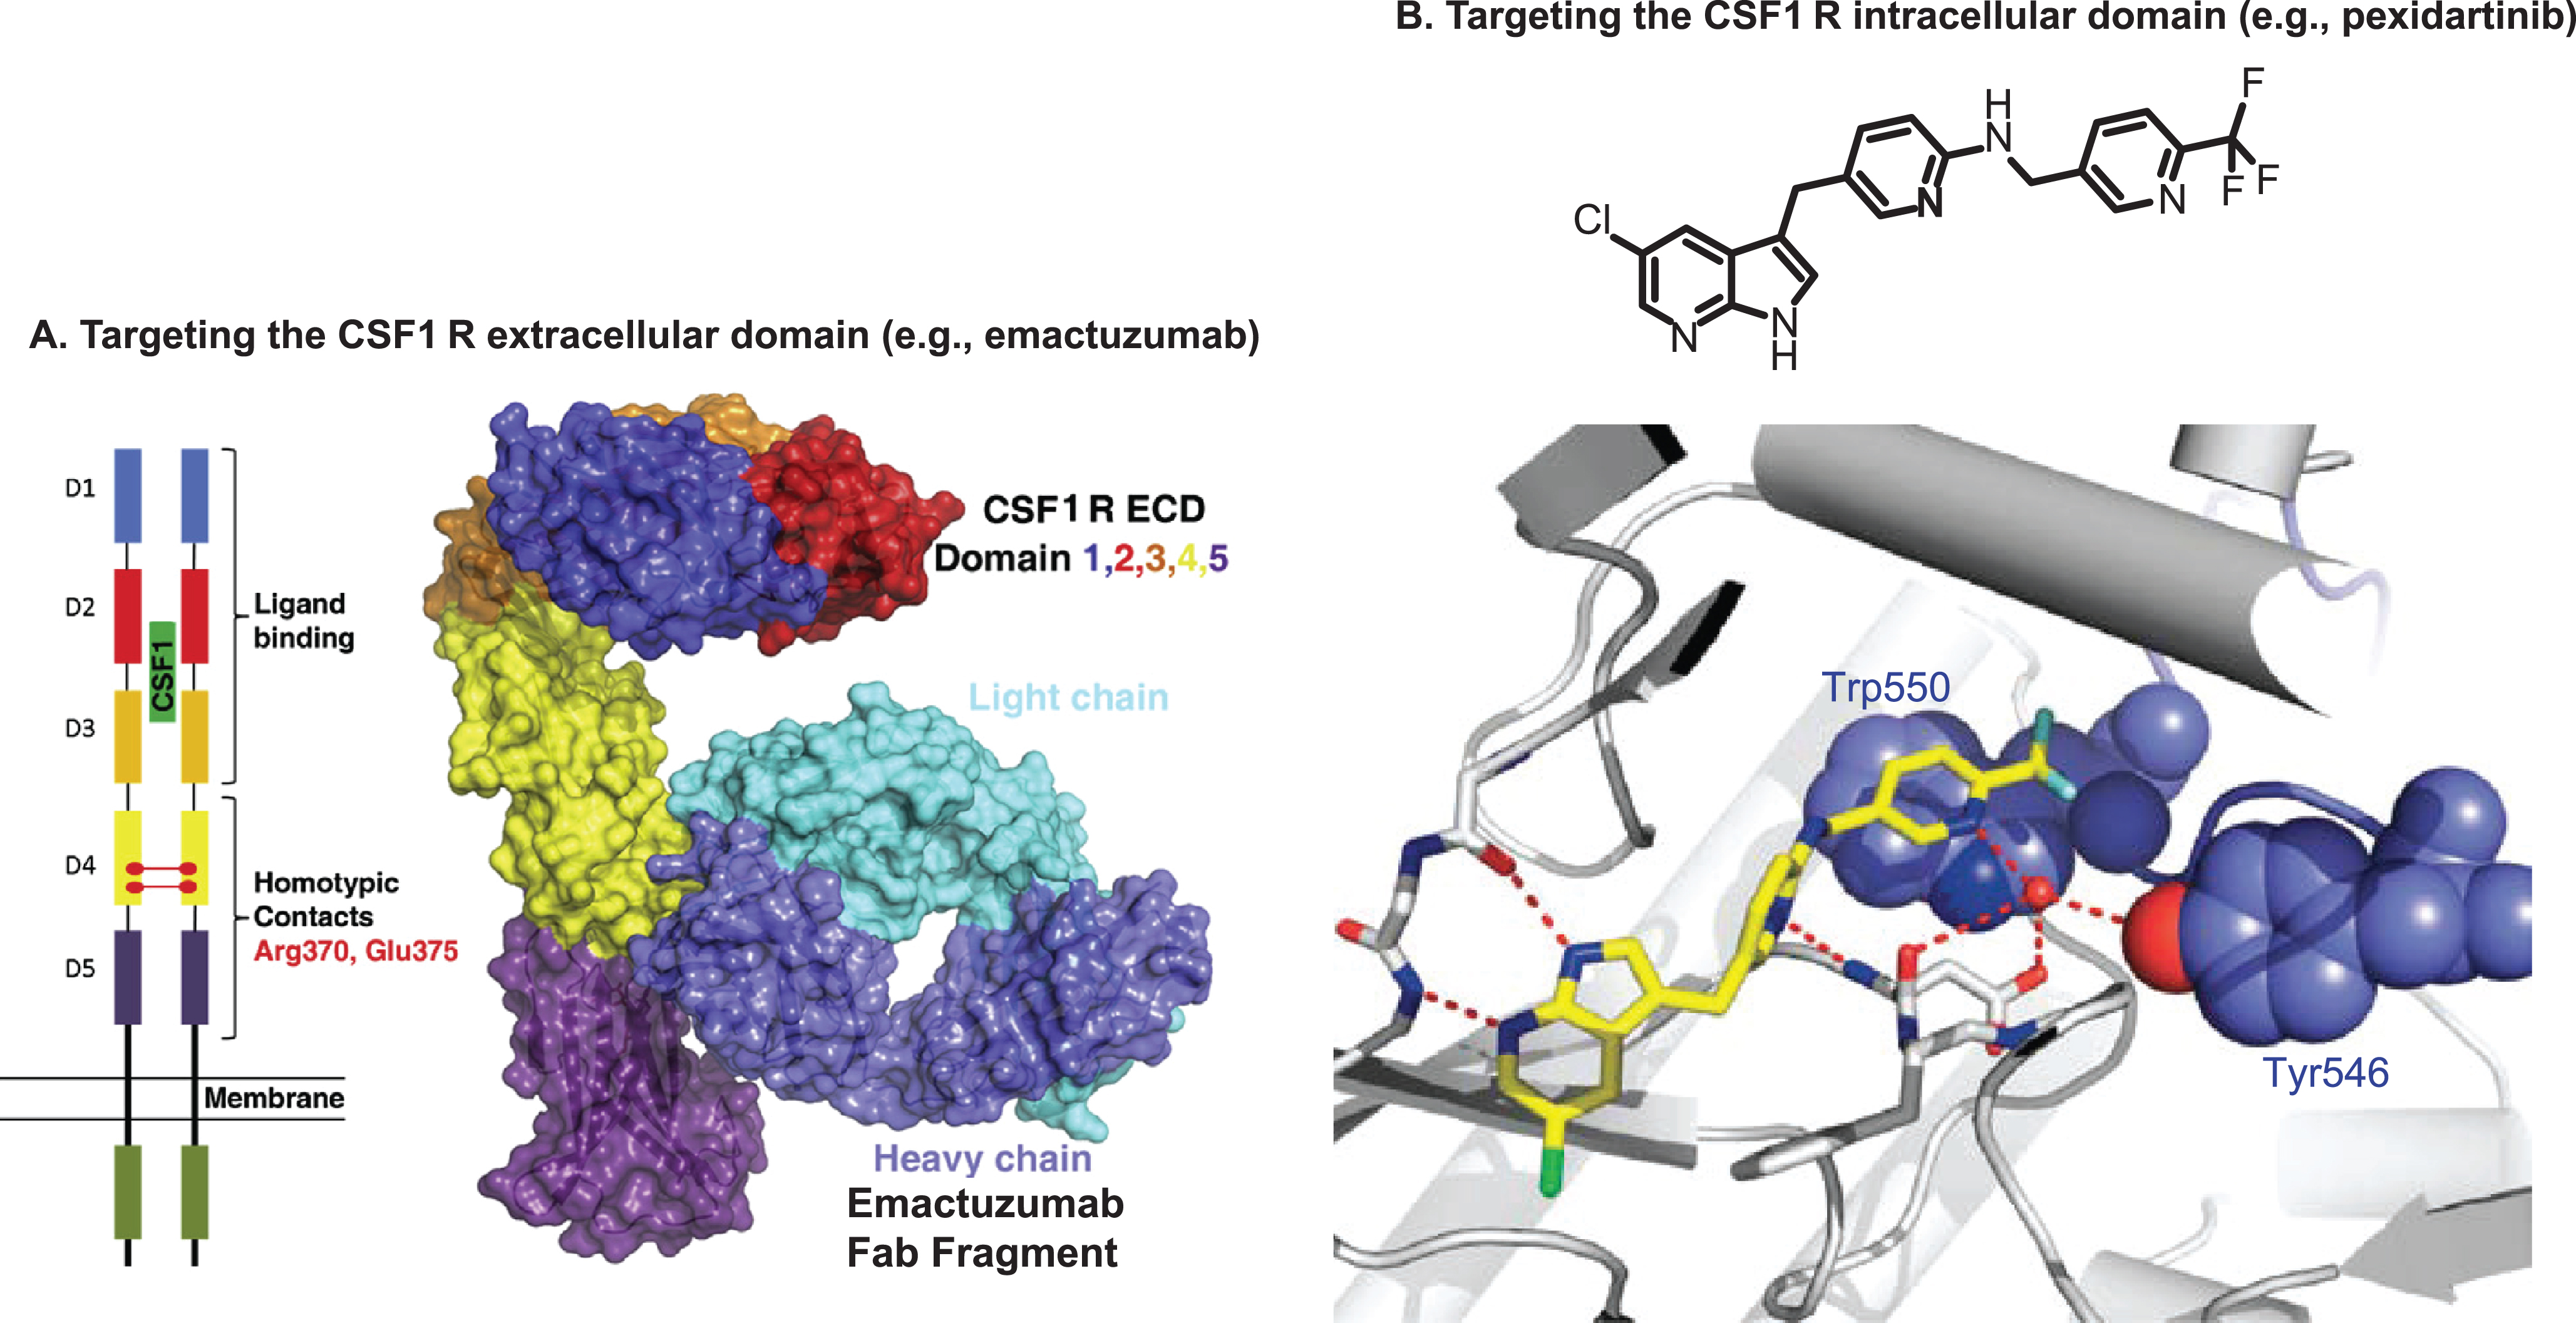 Molecular targets for TGCT therapy. A. Schematic representation (left) of the CSF1R extracellular domain dimer. Key residues Arg370 and Glu375 most likely involved in dimerization in domain 4 are highlighted. The overall structure of the CSF1R extracellular domain monomer complex with fab fragment of emactuzumab is shown in surface representation (right). B. Chemical structure of pexidartinib (top) and conformation-specific inhibition of CSF1R (bottom). Pexidartinib binds the autoinhibited state of CSF1R and makes direct contact with the juxtamembrane region. The key hydrogen bond interactions are highlighted. The CSF1R kinase domain is shown in gray, the juxtamembrane region (including Tyr546 and Trp550) in purple, and PLX3397 in yellow (oxygen in red and chlorine in green).CSF1R, colony-stimulating factor 1 receptor; ECD, extracellular domain; TGCT, tenosynovial giant cell tumor; Trp550, tryptophan residue 550; Tyr546, tyrosine residue 546.Figure 2A is reprinted from Cancer Cell, vol 25, Carola H. Ries, Michael A. Cannarile, Sabine Hoves, et al., Targeting Tumor-Associated Macrophages with Anti-CSF-1 R Antibody Reveals a Strategy for Cancer Therapy, pages 846-859, Copyright 2014, with permission from Elsevier. Figure 2B is from The New England Journal of Medicine, William D. Tap, Zev A. Wainberg, Stephen P. Anthony, et al., Structure-Guided Blockade of CSF1R Kinase in Tenosynovial Giant-Cell Tumor, vol 373, pages 428-437. Copyright © 2015 Massachusetts Medical Society. Reprinted with permission from Massachusetts Medical Society.